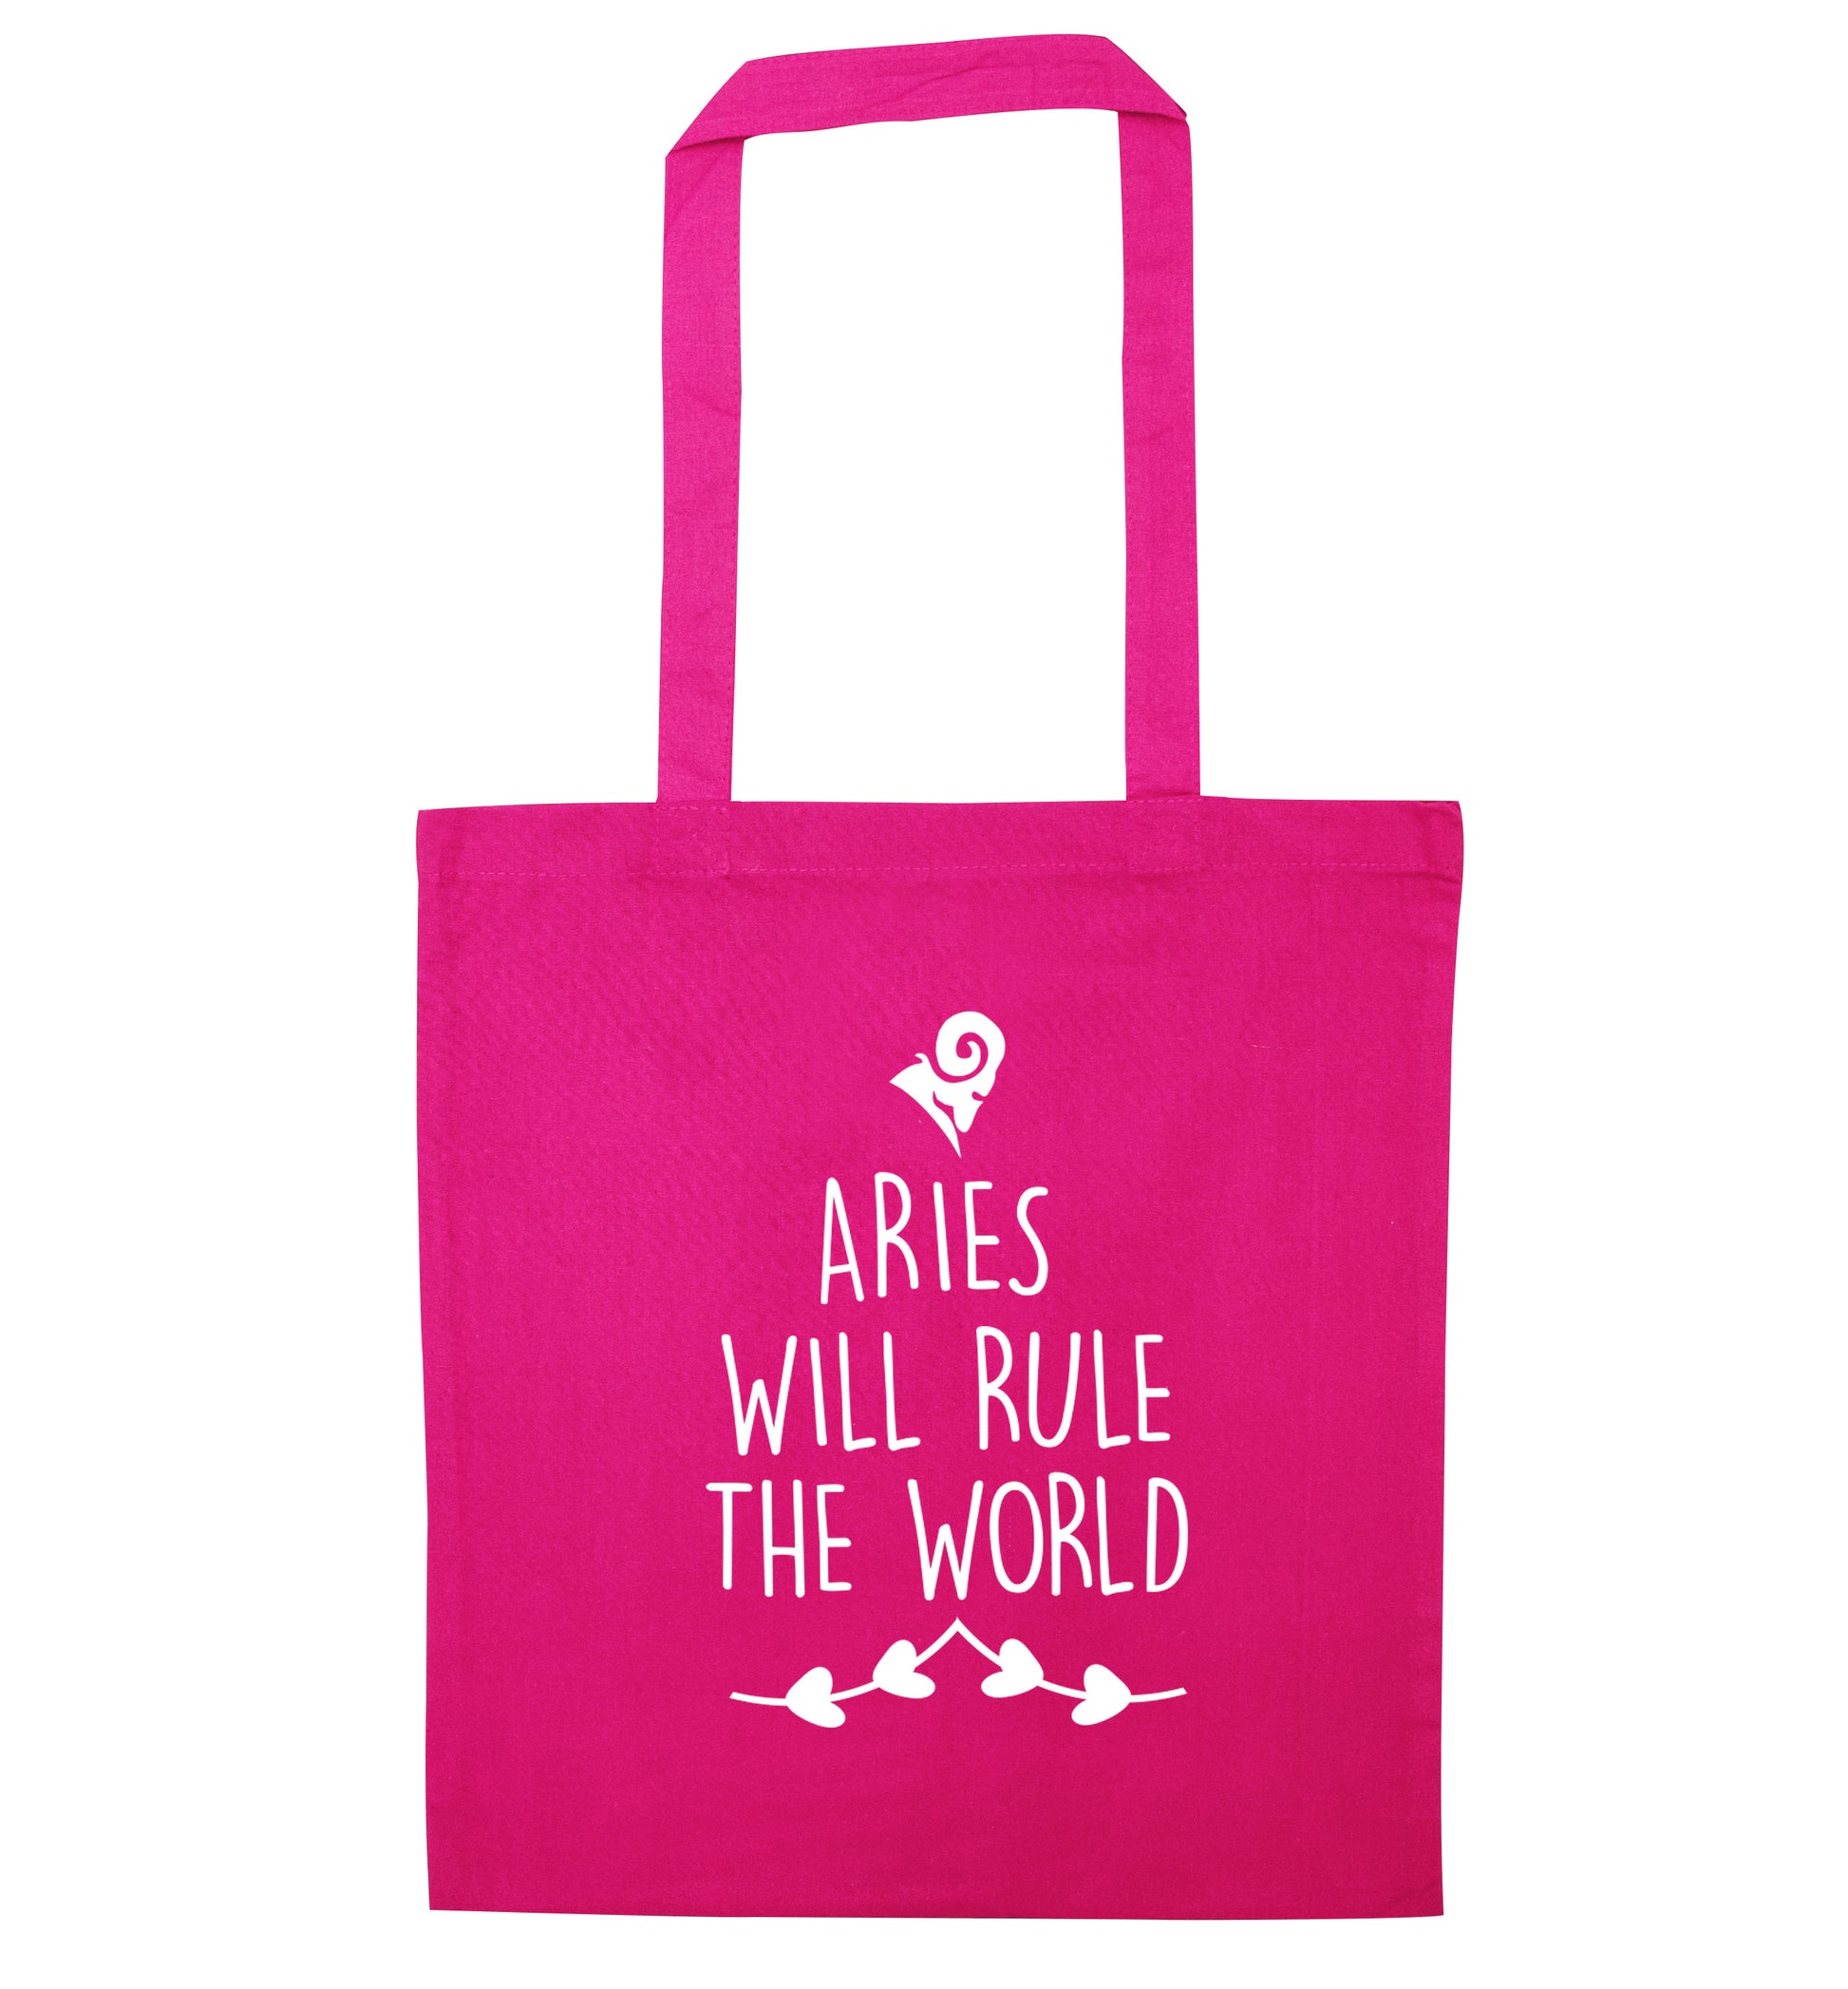 Aries will rule the world pink tote bag